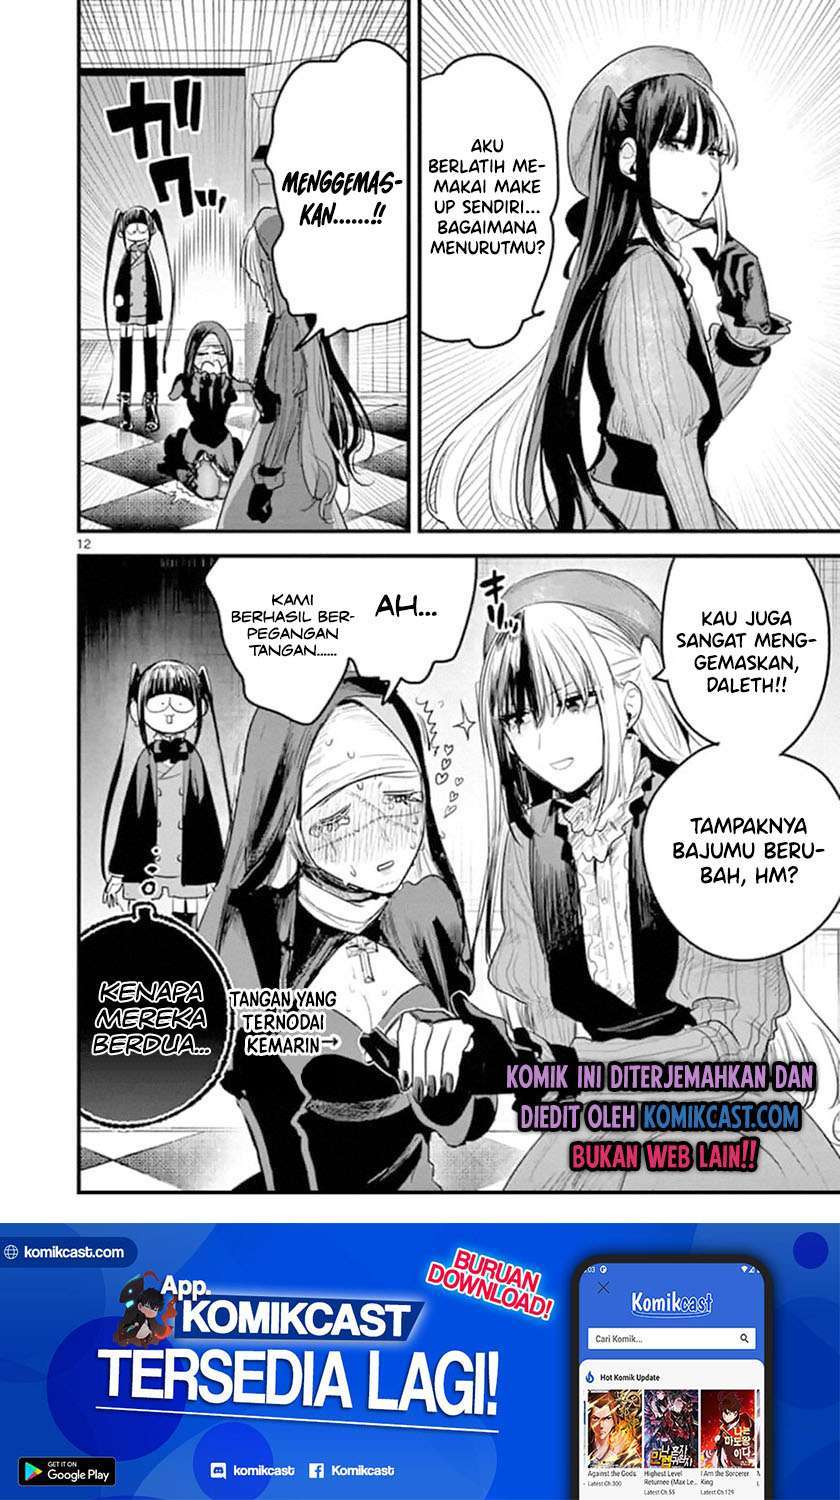 The Duke of Death and his Black Maid Chapter 173 Bahasa Indonesia